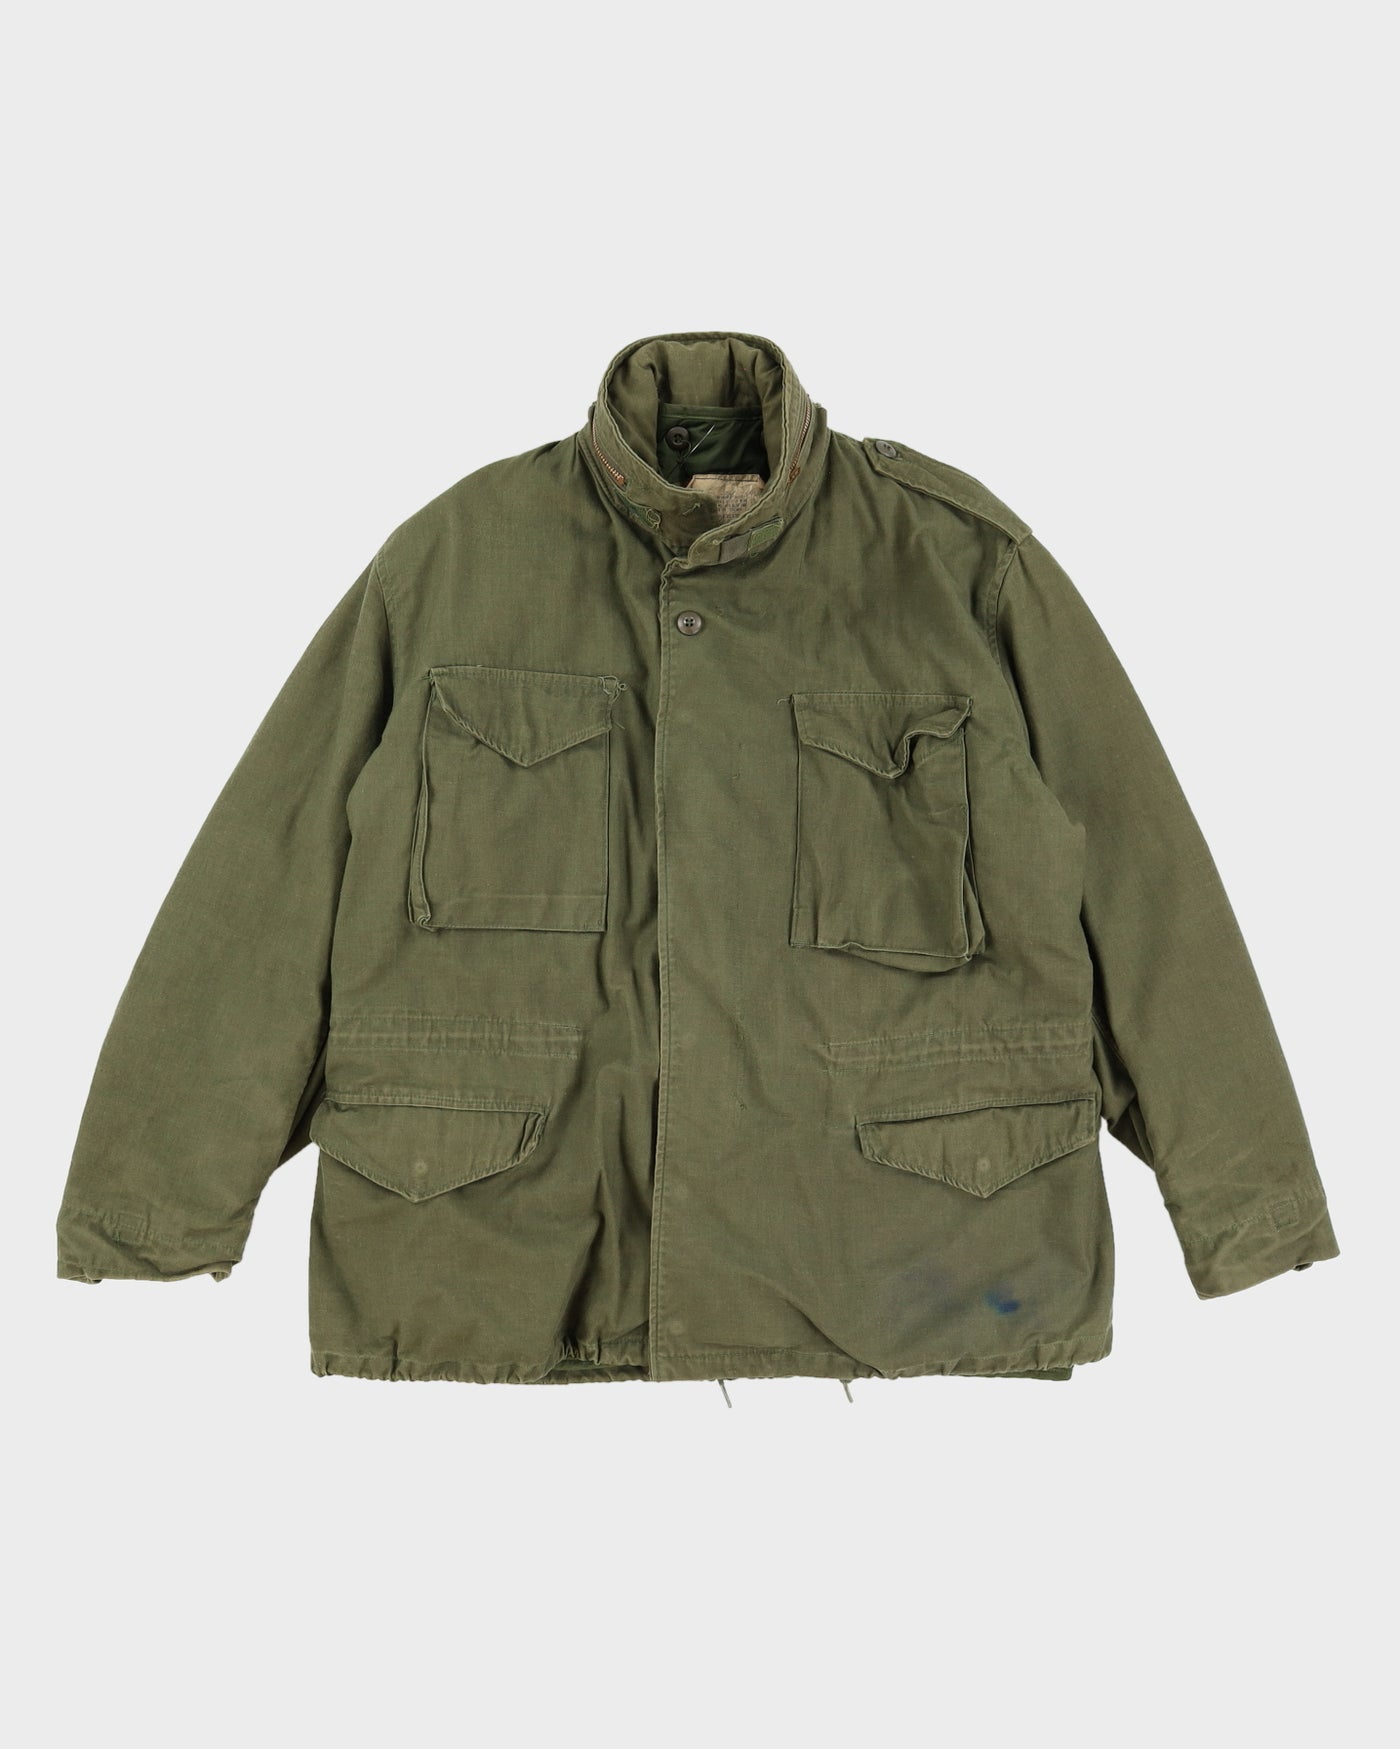 70s US Army M65 Field Jacket & Liner - L